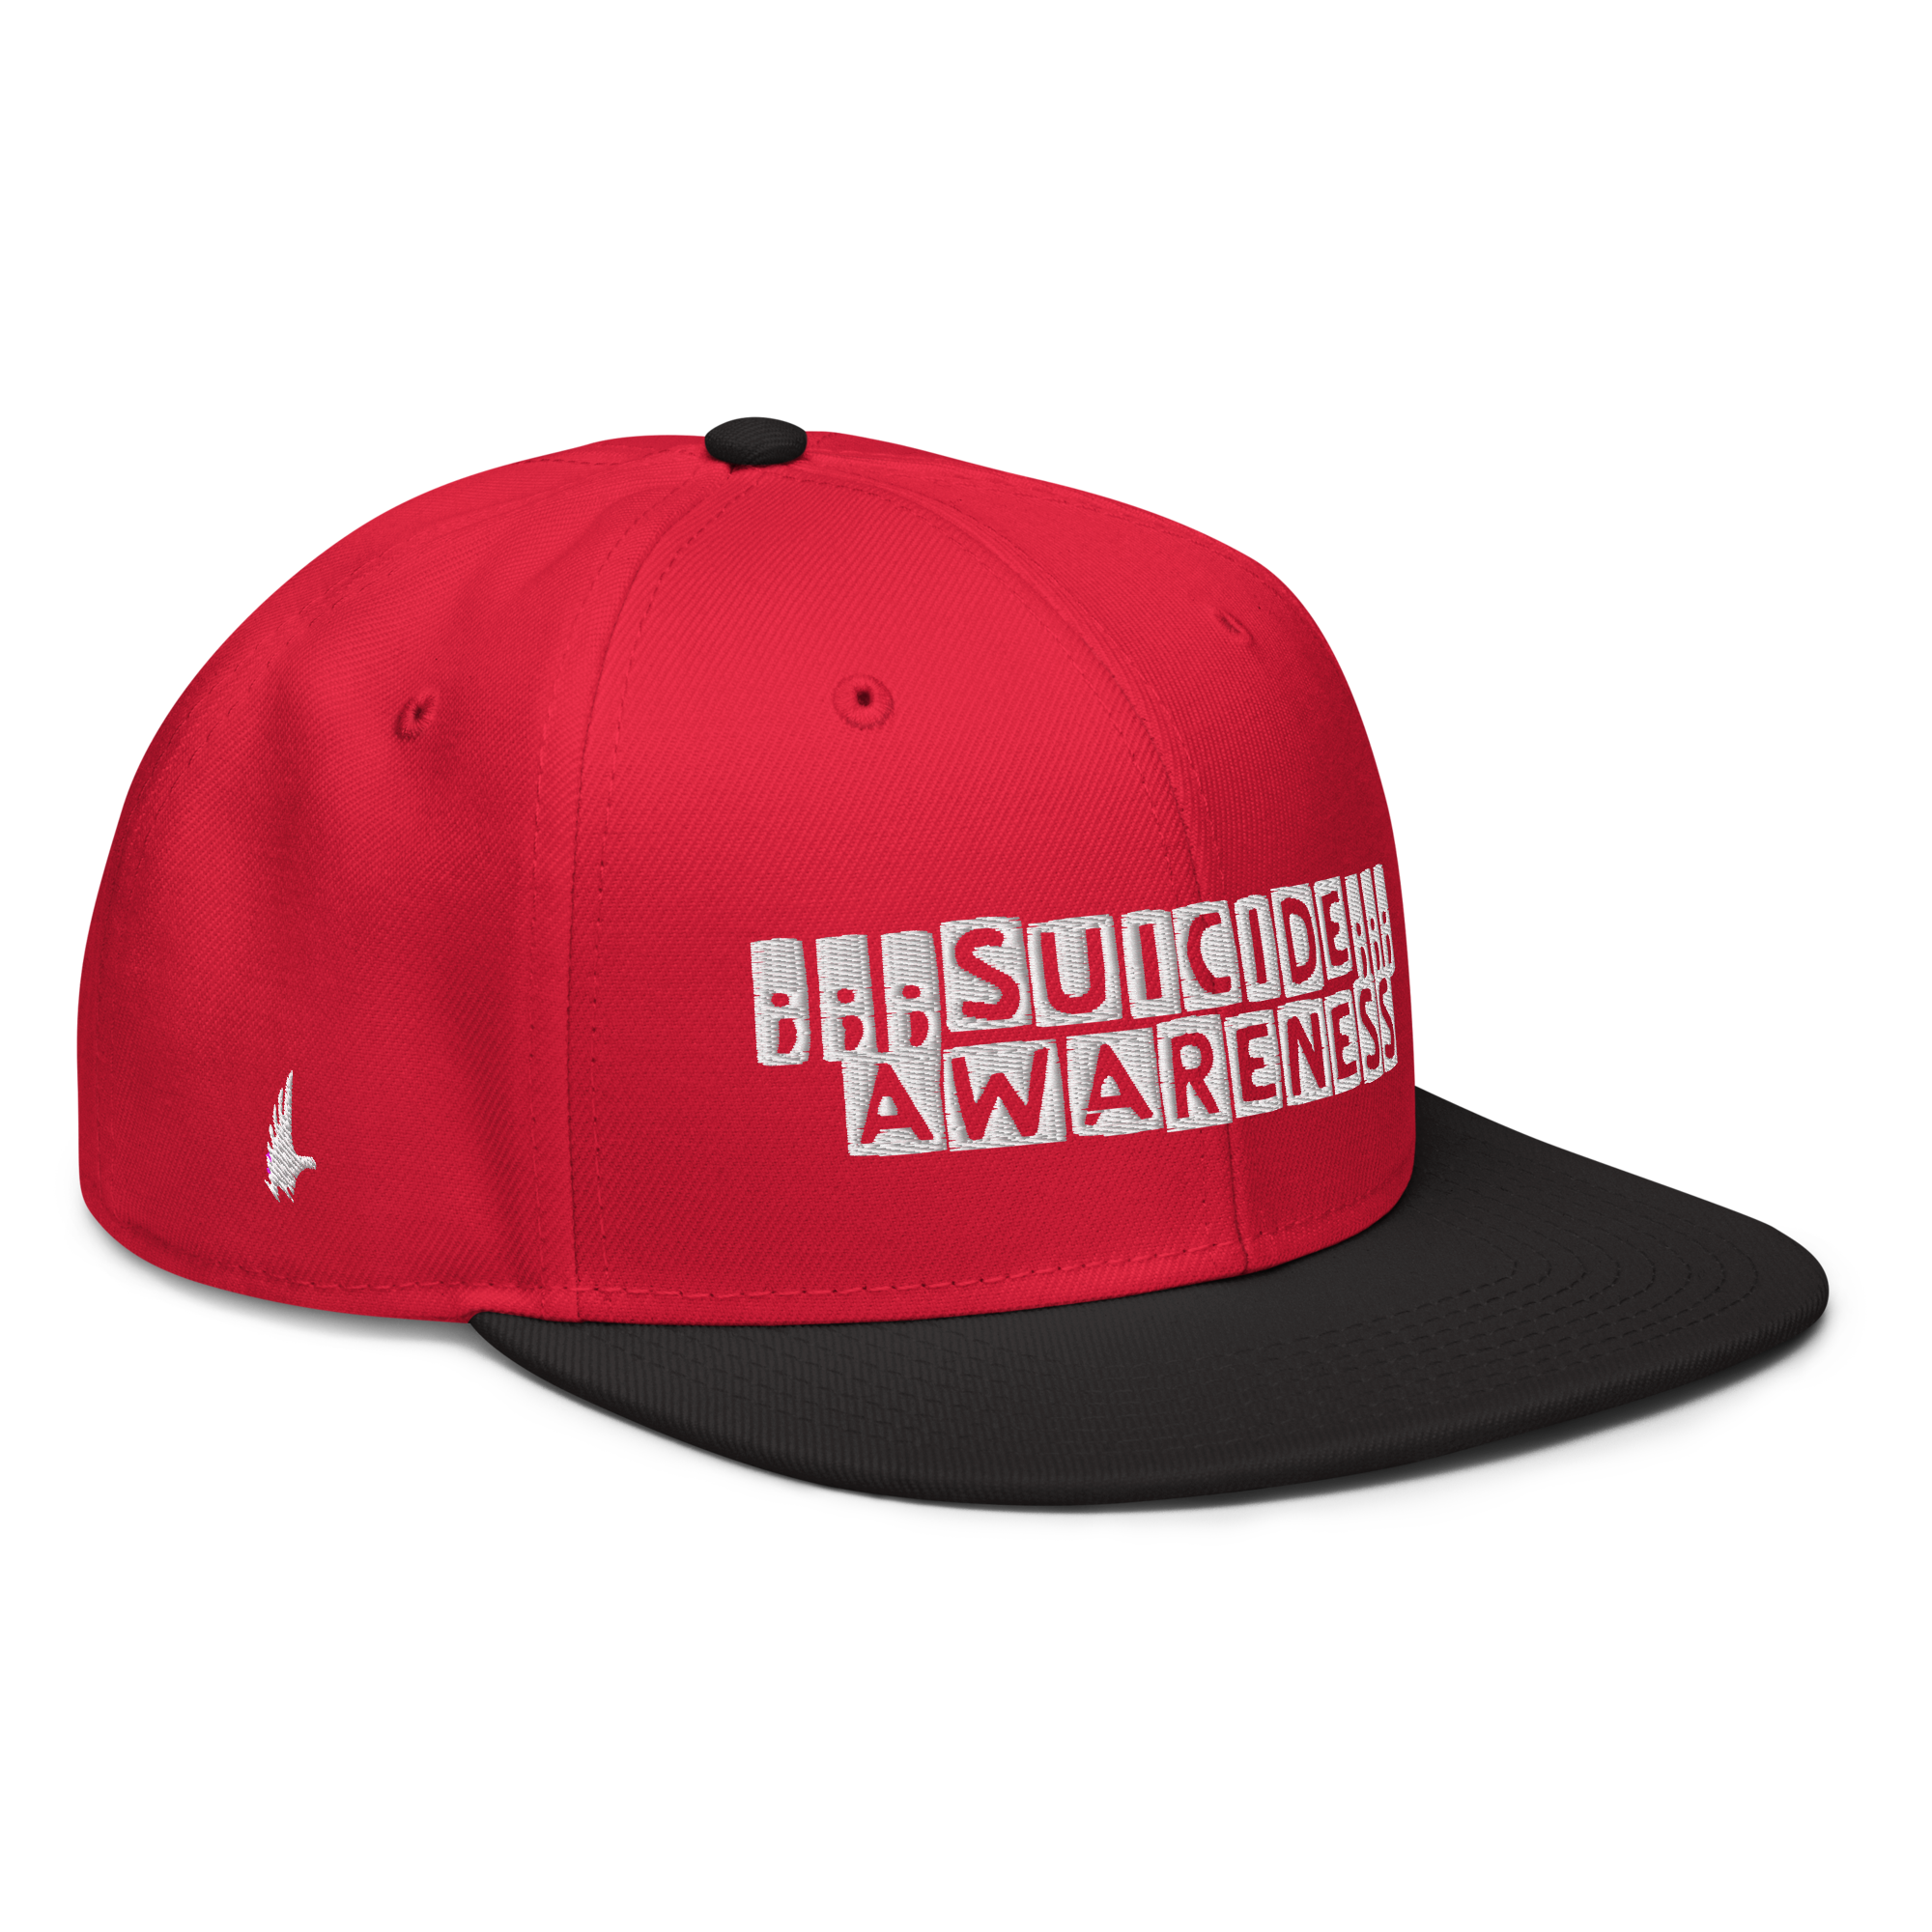 Suicide Awareness Snapback Hat - Red / White / Black OS - Loyalty Vibes